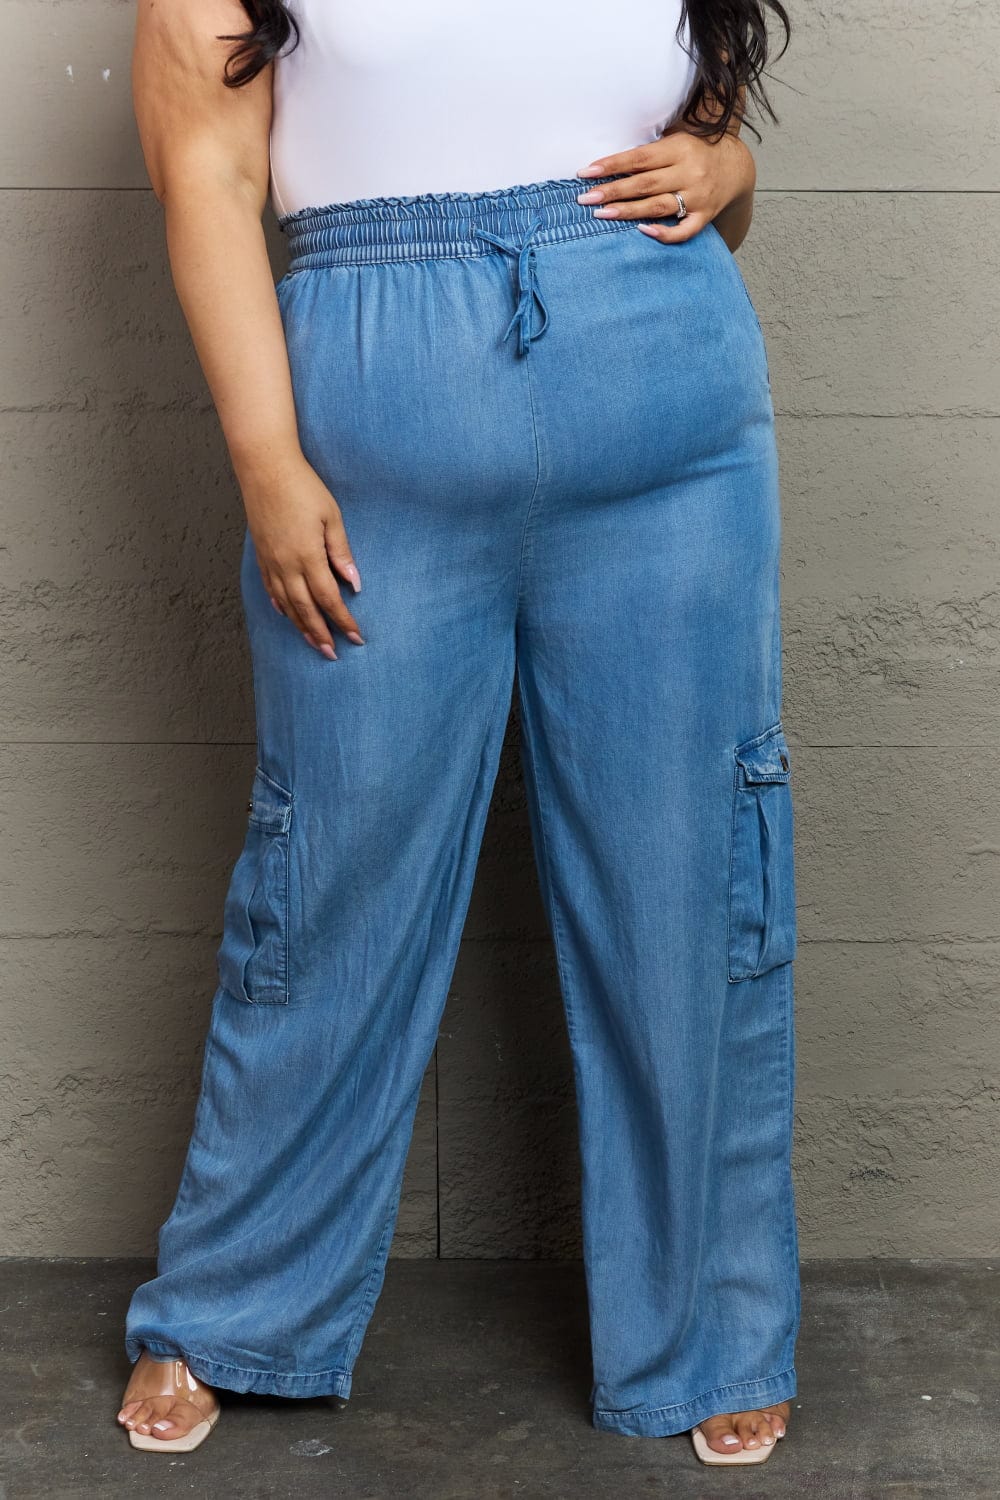 Out Of Site Full Size Denim Cargo Pants - Body By J'ne